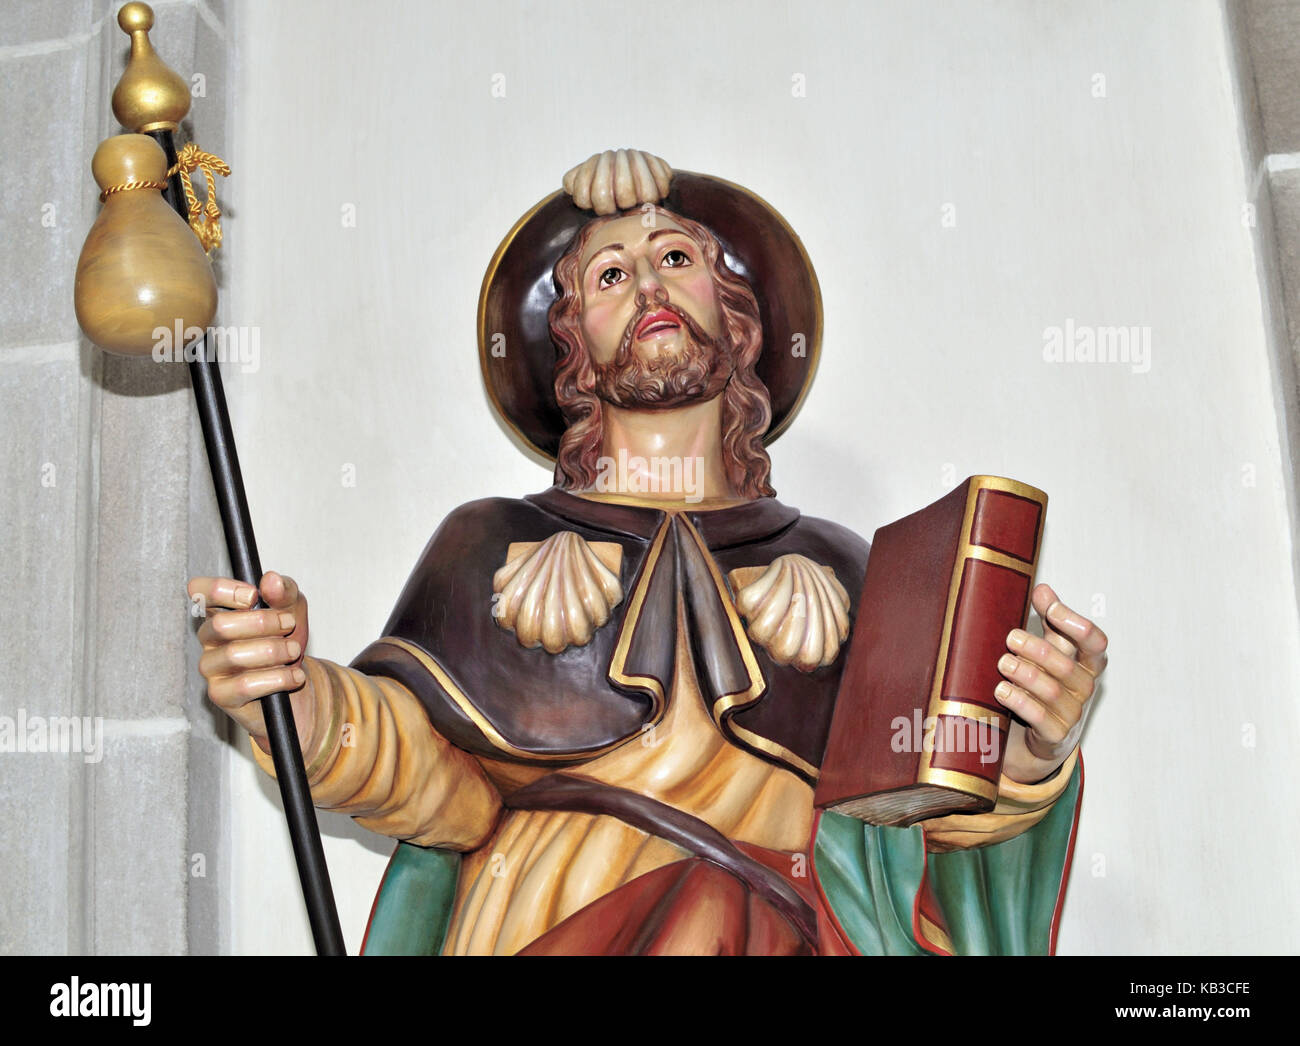 Spain, Galicia, statue of the holy Jakobus in the basilica of the monastery of Samos, Stock Photo